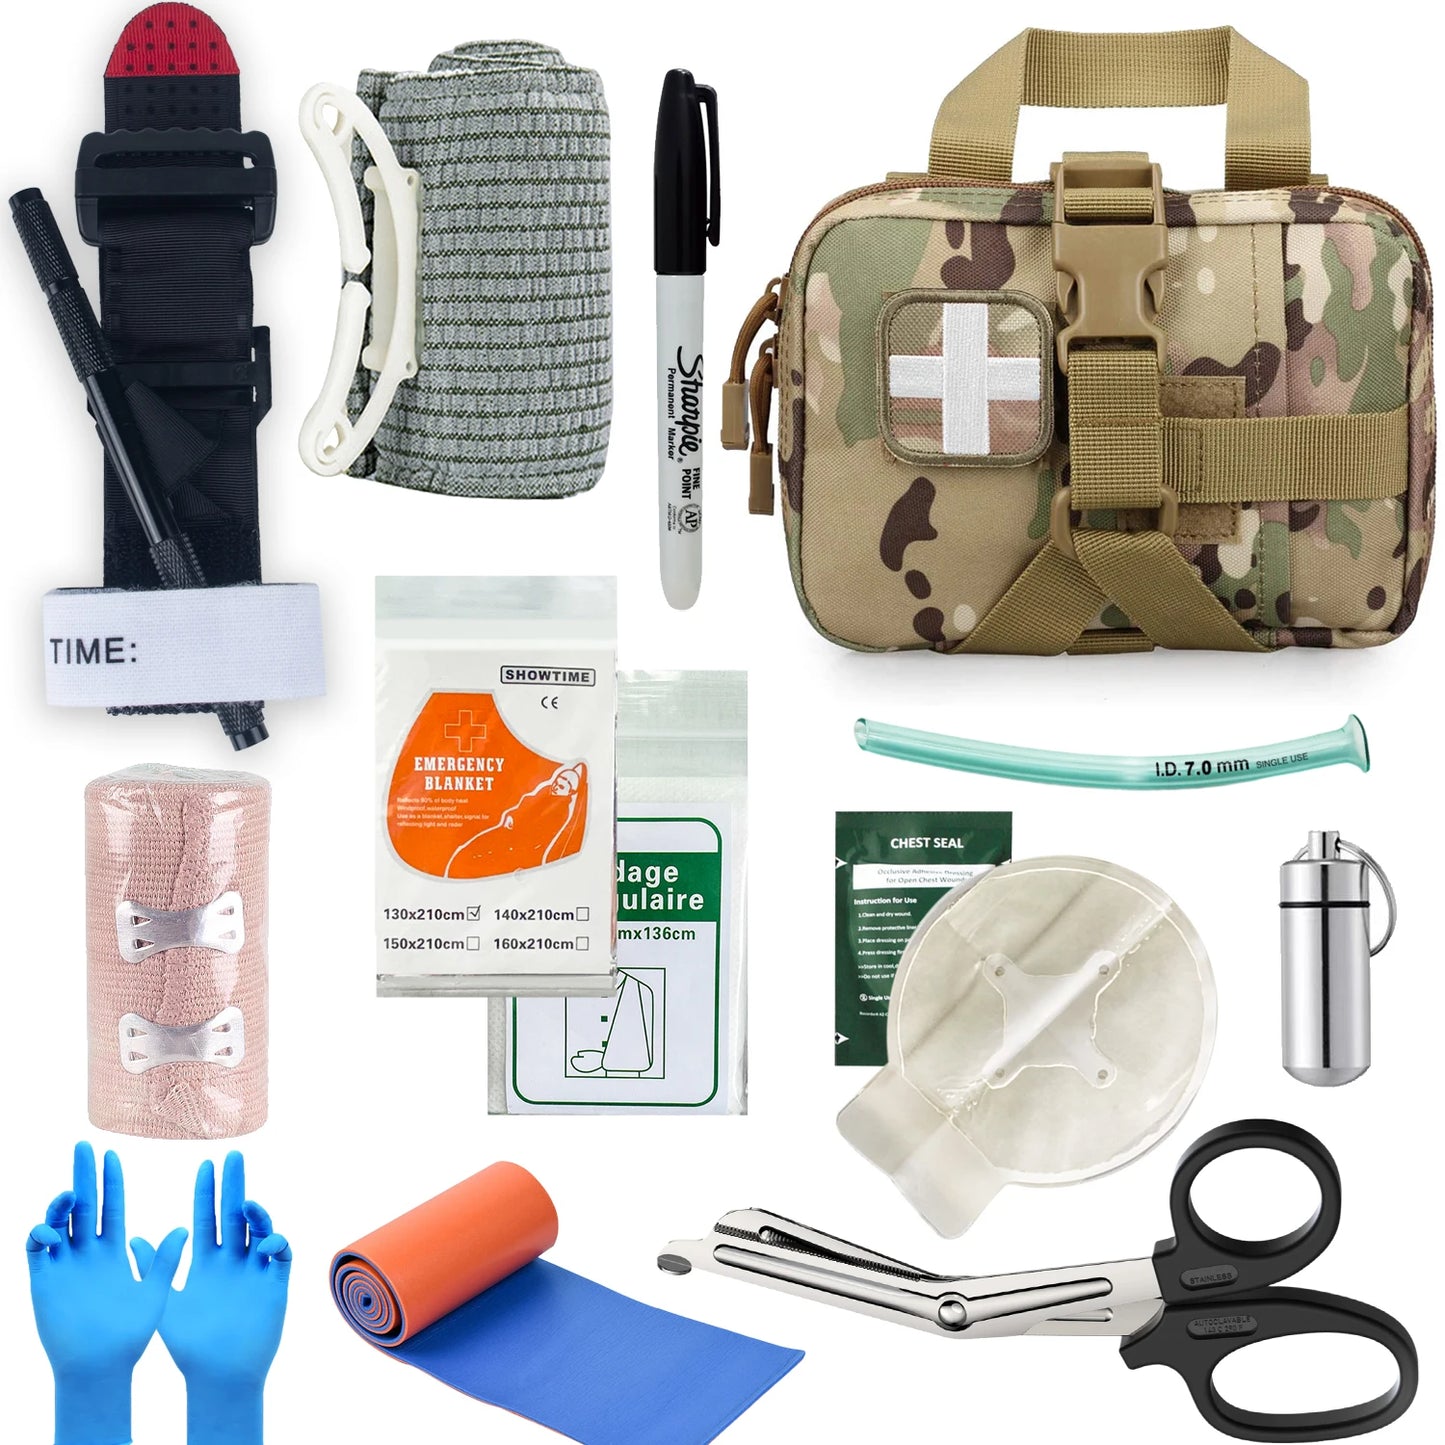 IFAK Trauma Kit First Aid Medical Pouch Emergency Tourniquet Chest Seal Survival Gear and Equipment with Molle Car Travel Hiking